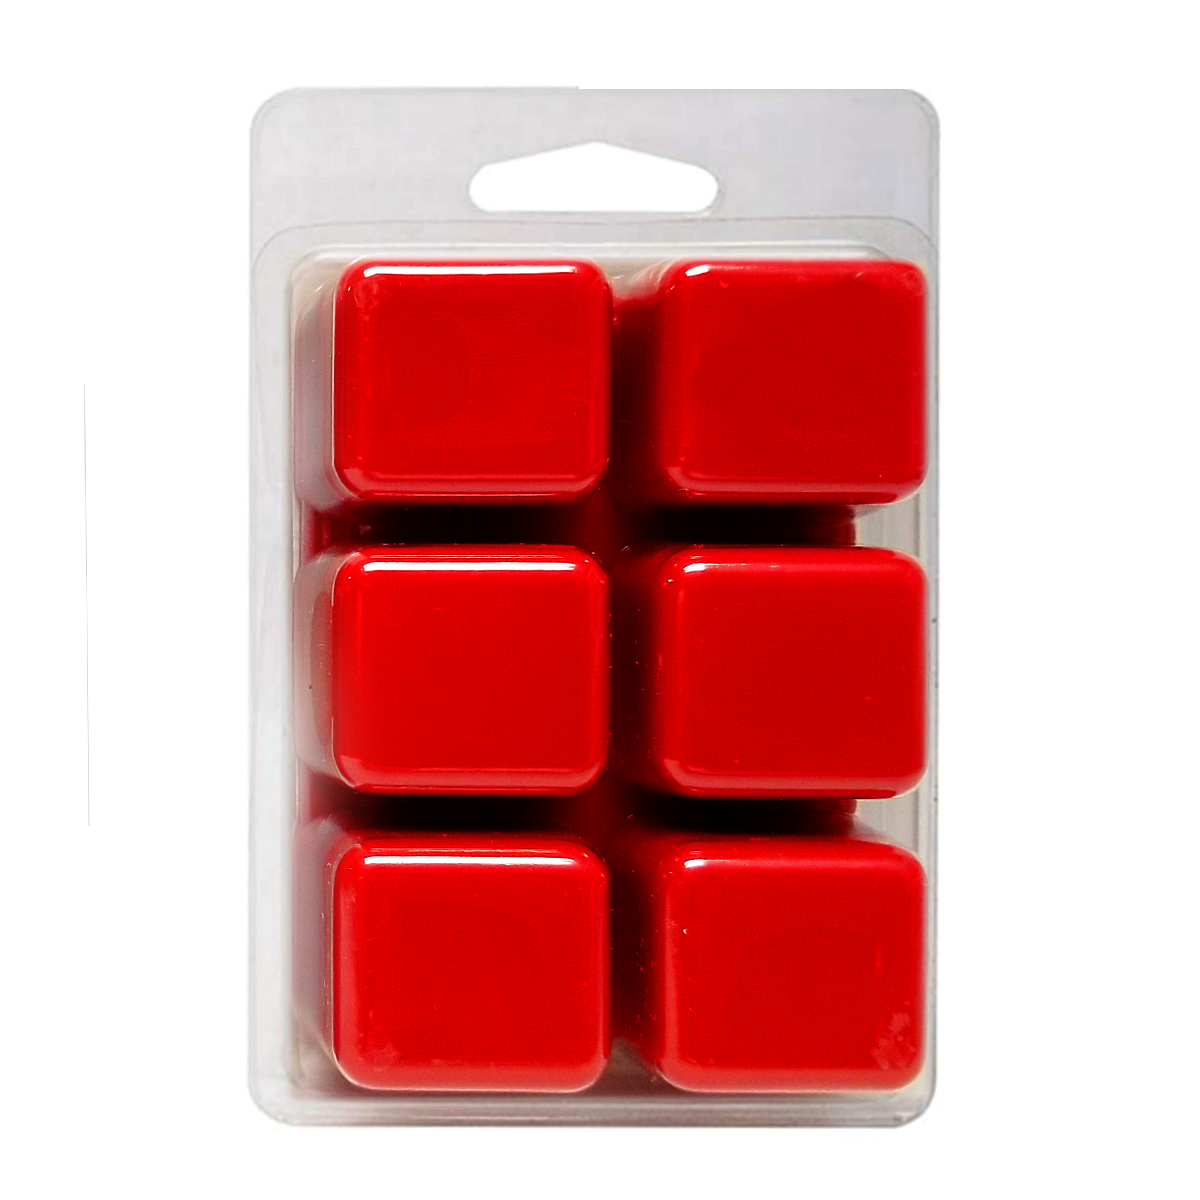 Forever Red - 3.2 oz Clamshell